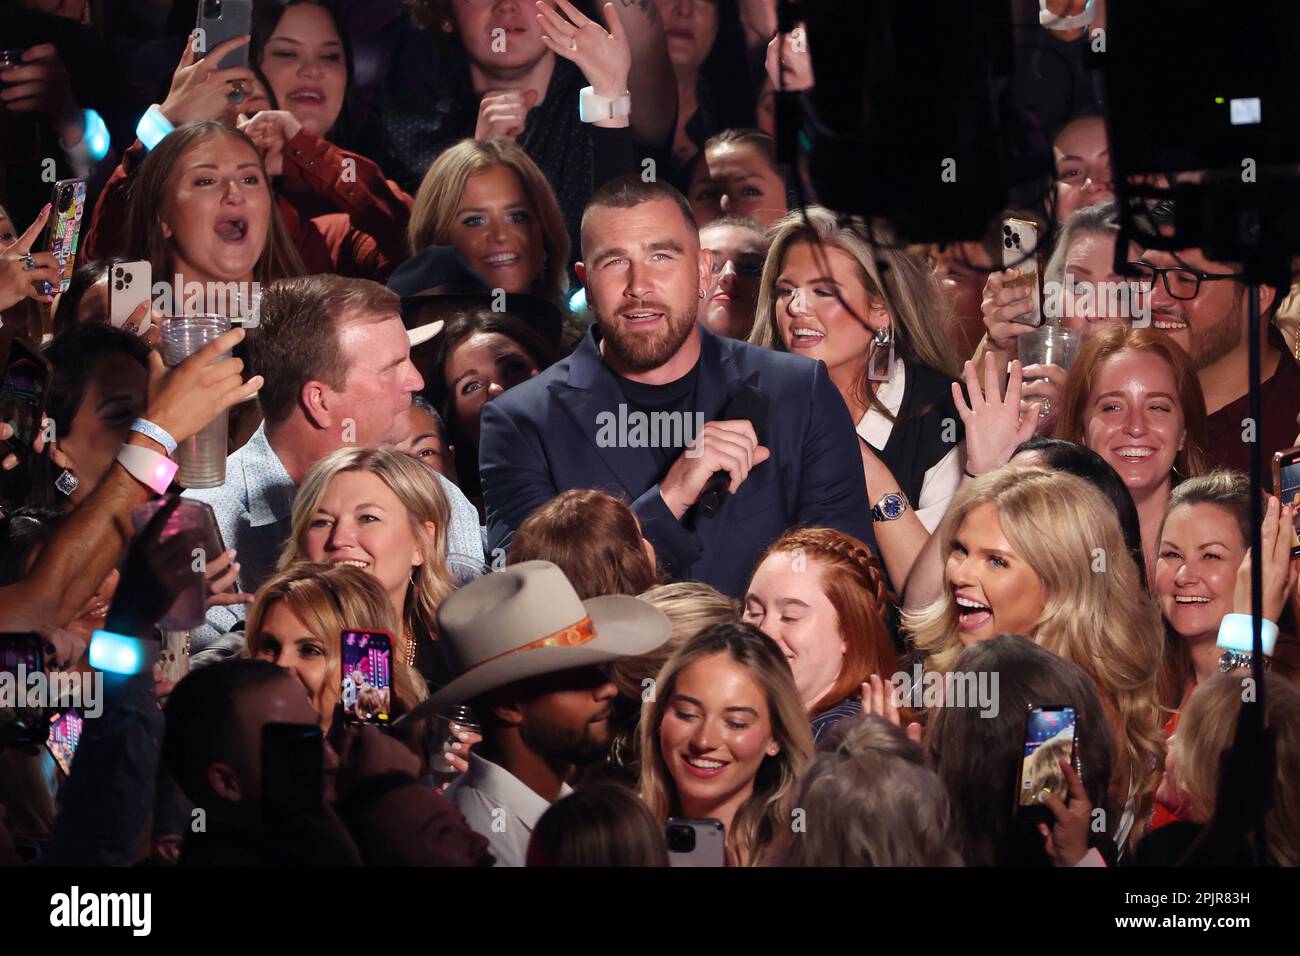 Travis Kelce Soars in Heeled Boots & Navy Suit at CMT Awards 2023 –  Footwear News